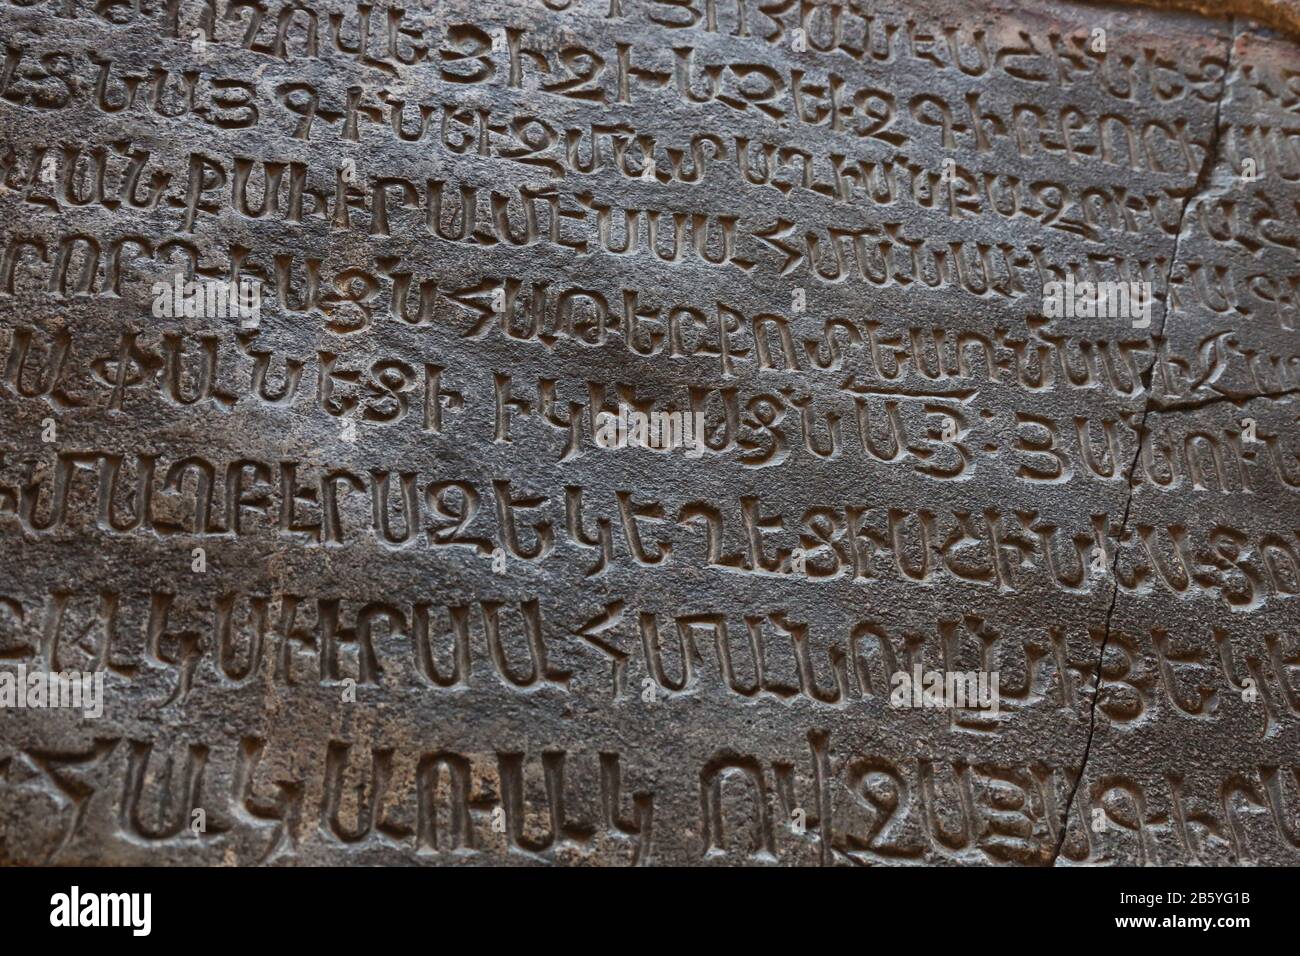 Ancient armenian plate with carved words Stock Photo